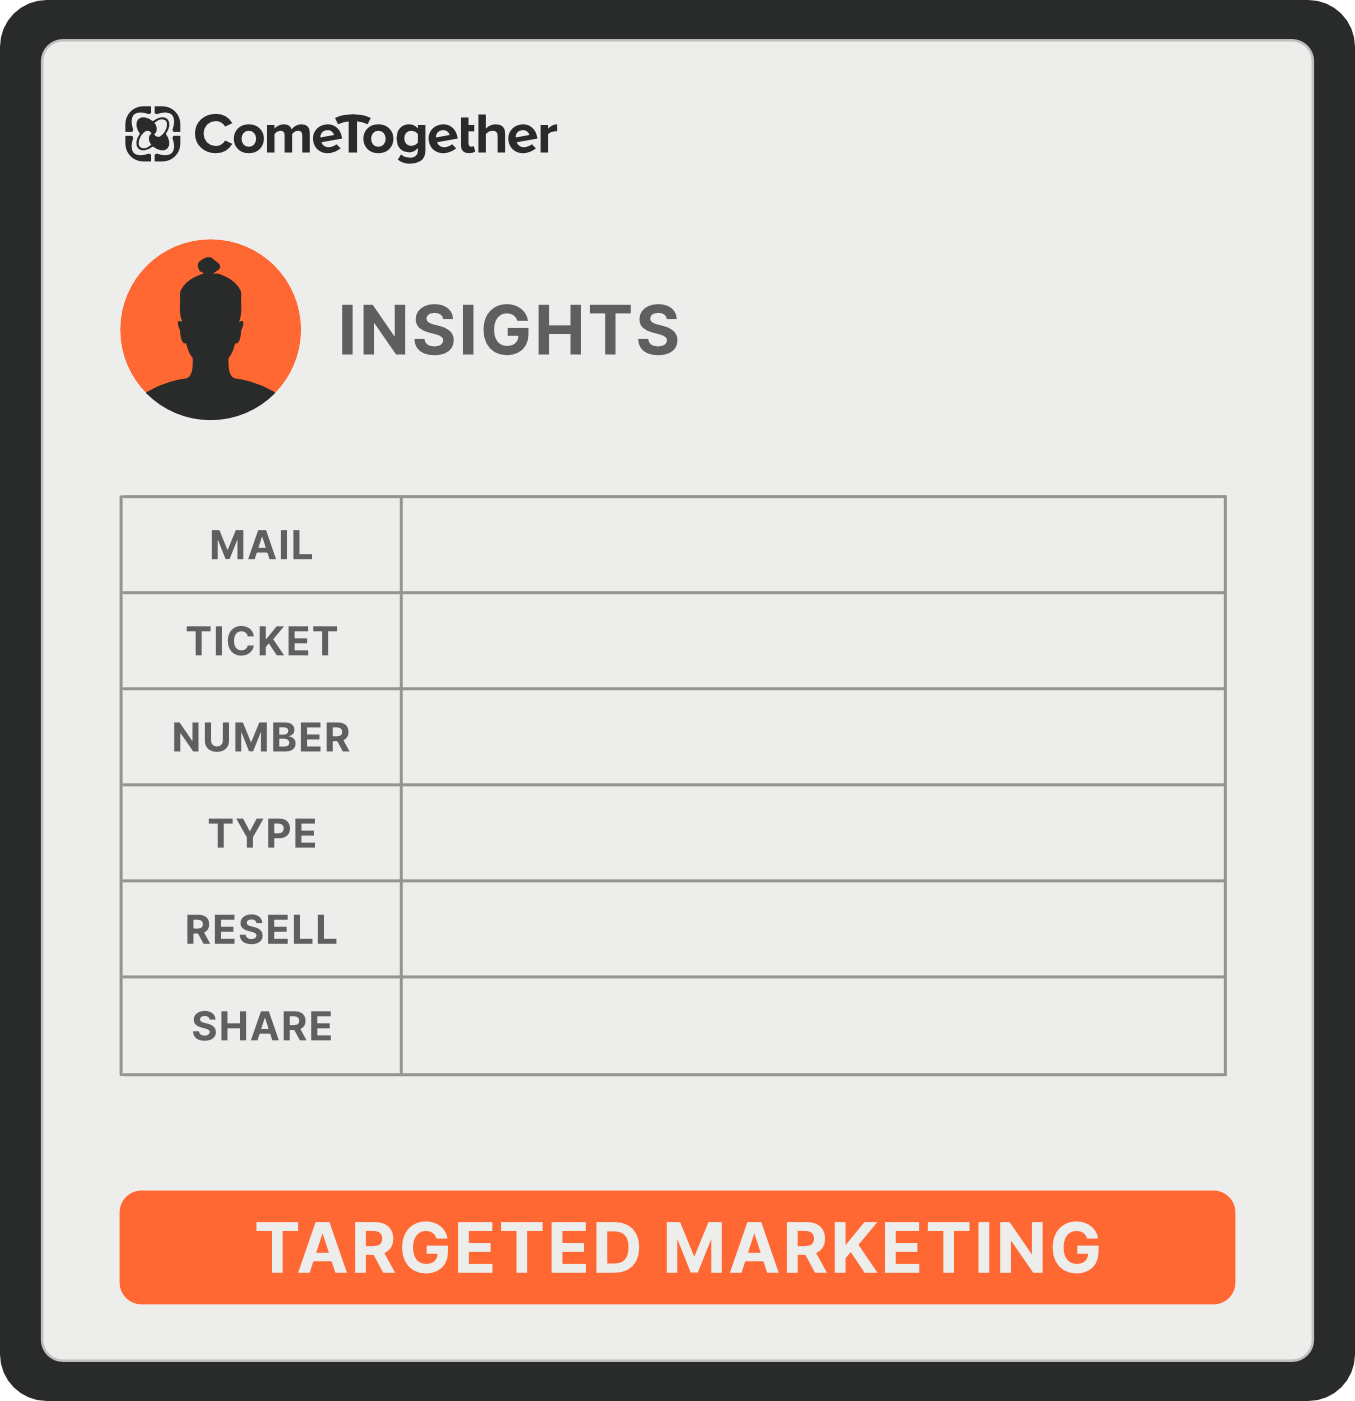 Visual of the ComeTogether Audience Insights. A user image is displayed at the top left corner with the word "insights" next to it. Below there is a table with the main contact data of this user such as mail, ticket, number, type, resell, and share. and at the bottom an orange button that says targeted marketing.